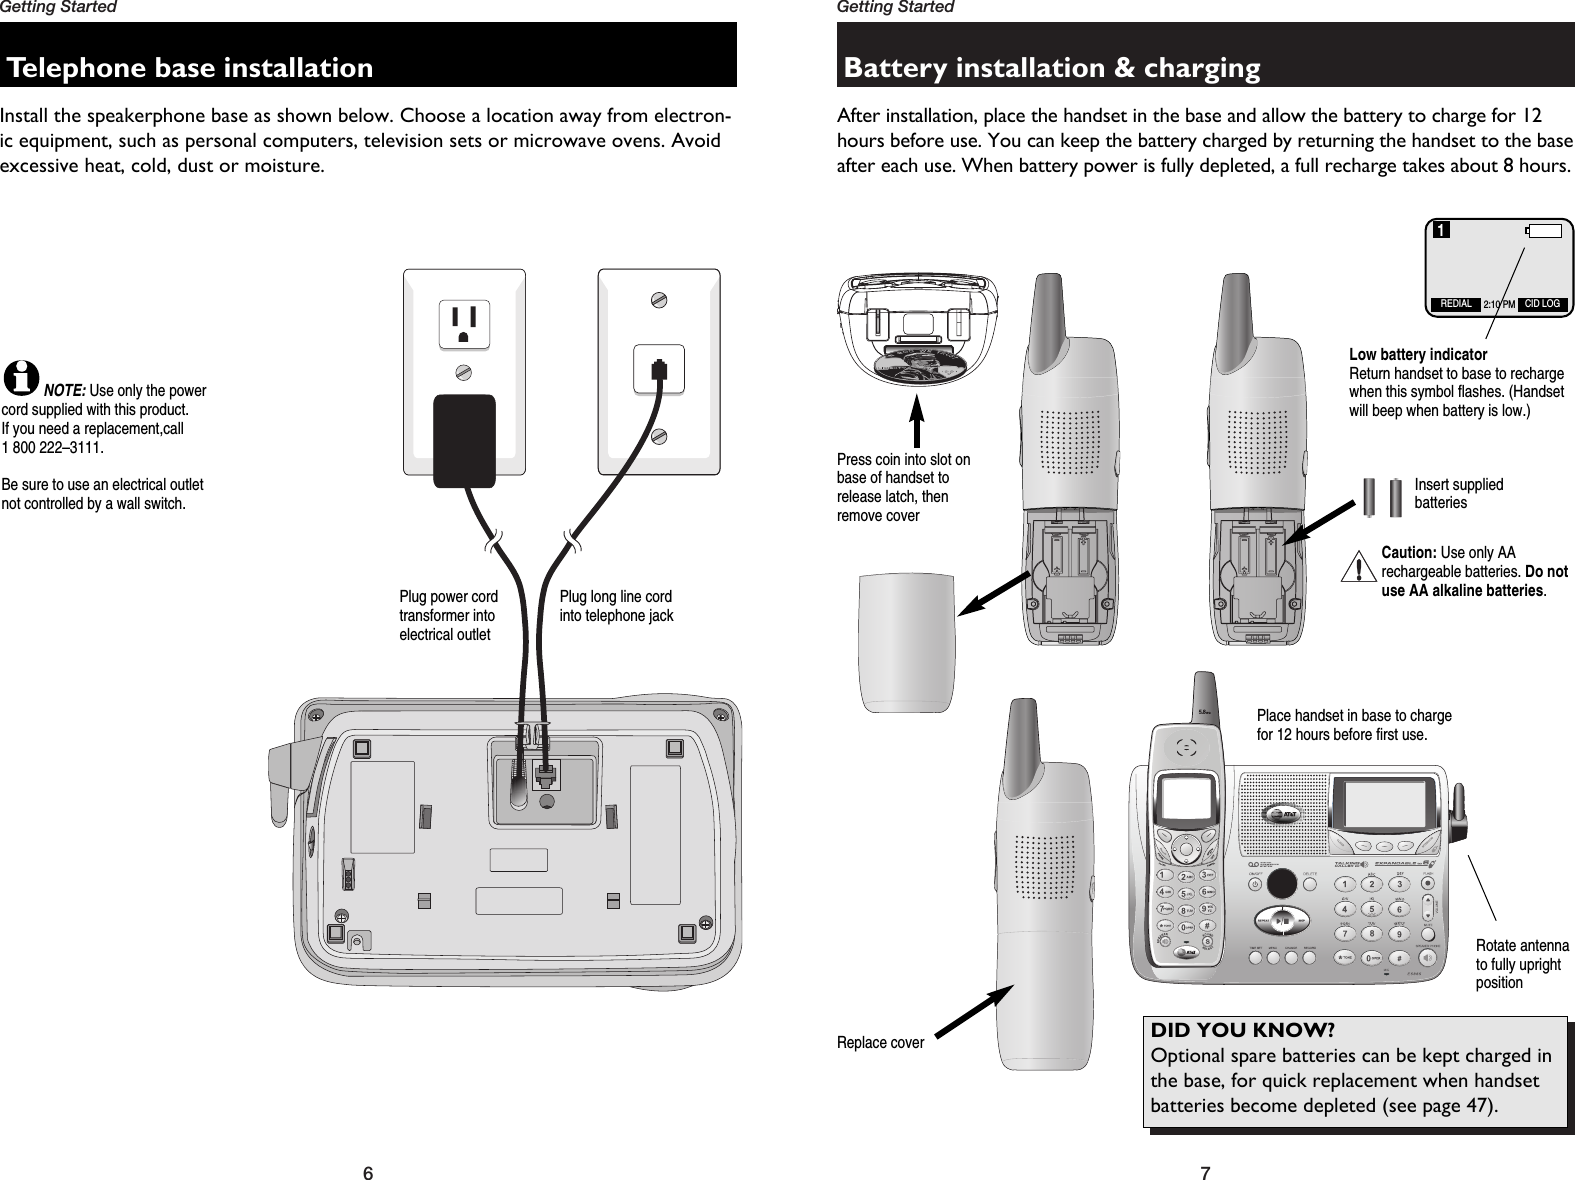 DID YOU KNOW? Optional spare batteries can be kept charged inthe base, for quick replacement when handsetbatteries become depleted (see page477Getting Started6Getting StartedBattery installation &amp; chargingAfter installation, place the handset in the base and allow the battery to charge for 12hours before use. You can keep the battery charged by returning the handset to the baseafter each use. When battery power is fully depleted, a full recharge takes about 8 hours.Press coin into slot onbase of handset torelease latch, thenremove coverInsert suppliedbatteriesReplace coverPlace handset in base to chargefor 12 hours before first use.Telephone base installationInstall the speakerphone base as shown below. Choose a location away from electron-ic equipment, such as personal computers, television sets or microwave ovens. Avoidexcessive heat, cold, dust or moisture.Plug power cord transformer into electrical outletPlug long line cordinto telephone jackLow battery indicatorReturn handset to base to rechargewhen this symbol flashes. (Handsetwill beep when battery is low.)NOTE:Use only the powercord supplied with this product.If you need a replacement,call 1 800 222–3111.Be sure to use an electrical outletnot controlled by a wall switch.Rotate antennato fully upright positionCaution: Use only AArechargeable batteries. Do notuse AA alkaline batteries.DID YOU KNOW? Optional spare batteries can be kept charged inthe base, for quick replacement when handsetbatteries become depleted (see page 47).REDIAL CID LOG2:10 PM1